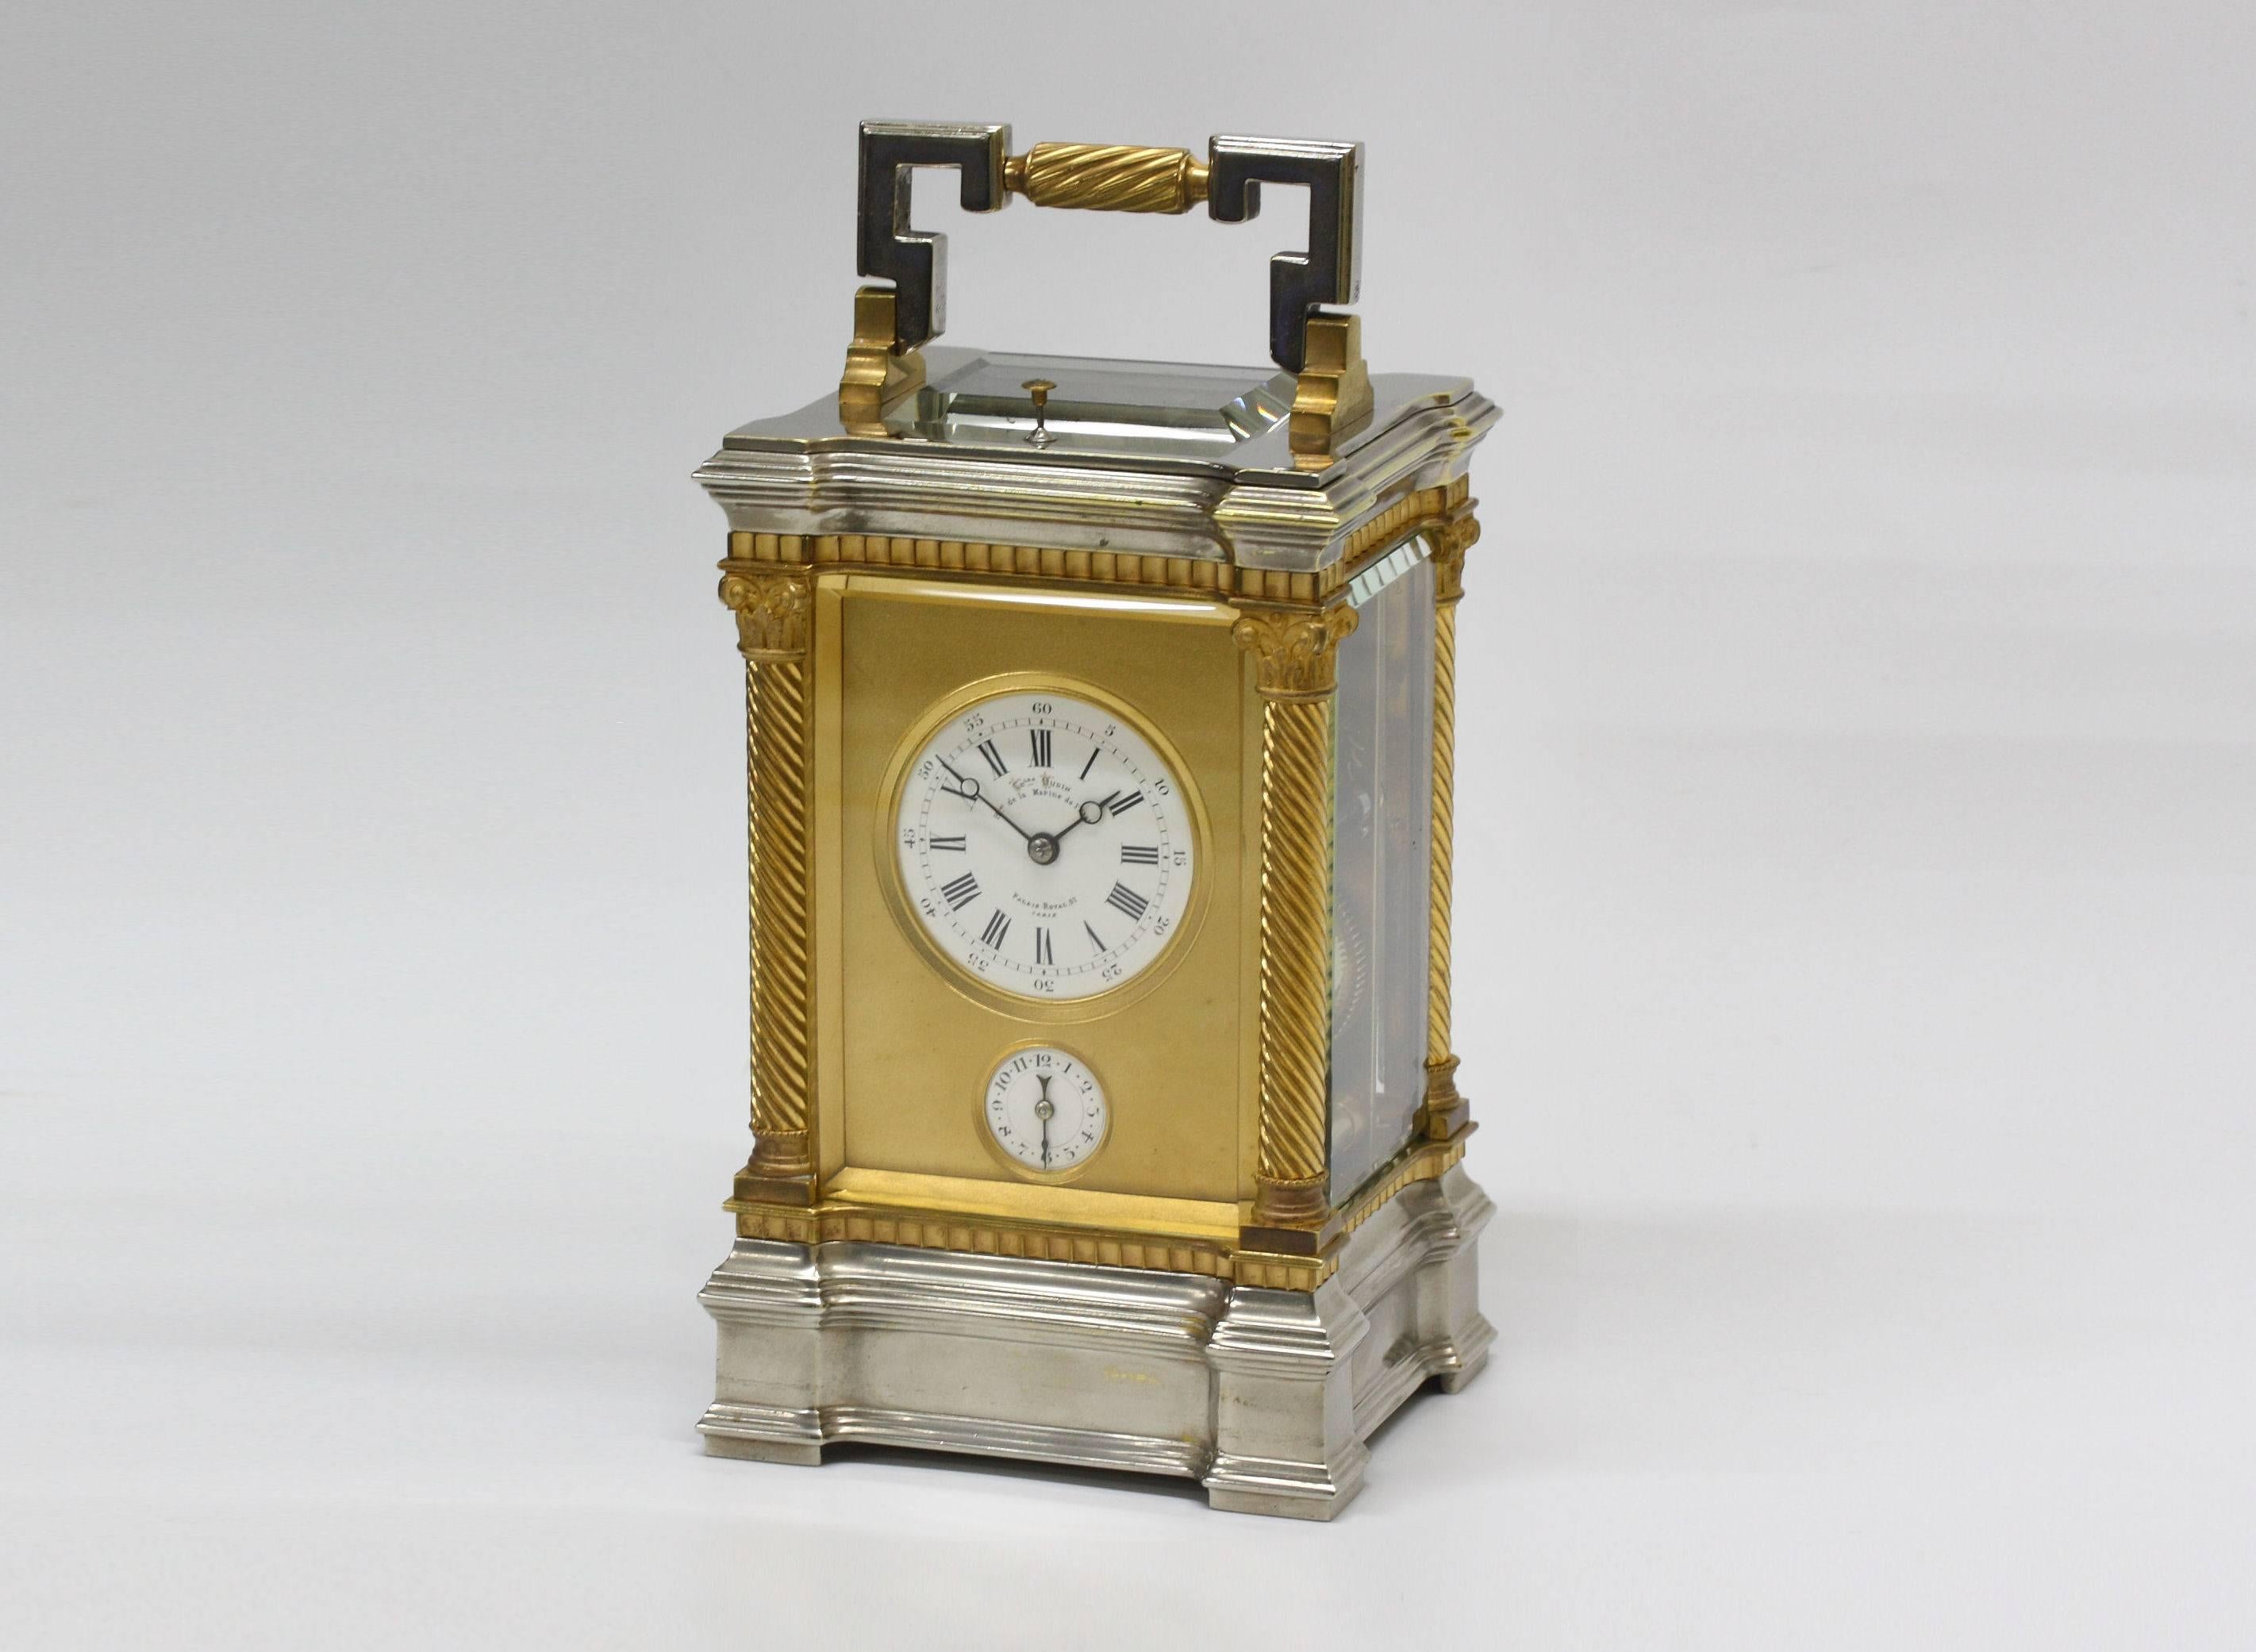 Charles Oudin, carriage clock and original leather case, with alarum and half-hourly strike, ormolu and nickeled bronze case, second half of 19th century.

Signed on the dial: Chles Oudin, Hger de la Marine de l’Etat, Palais-Royal, 52,